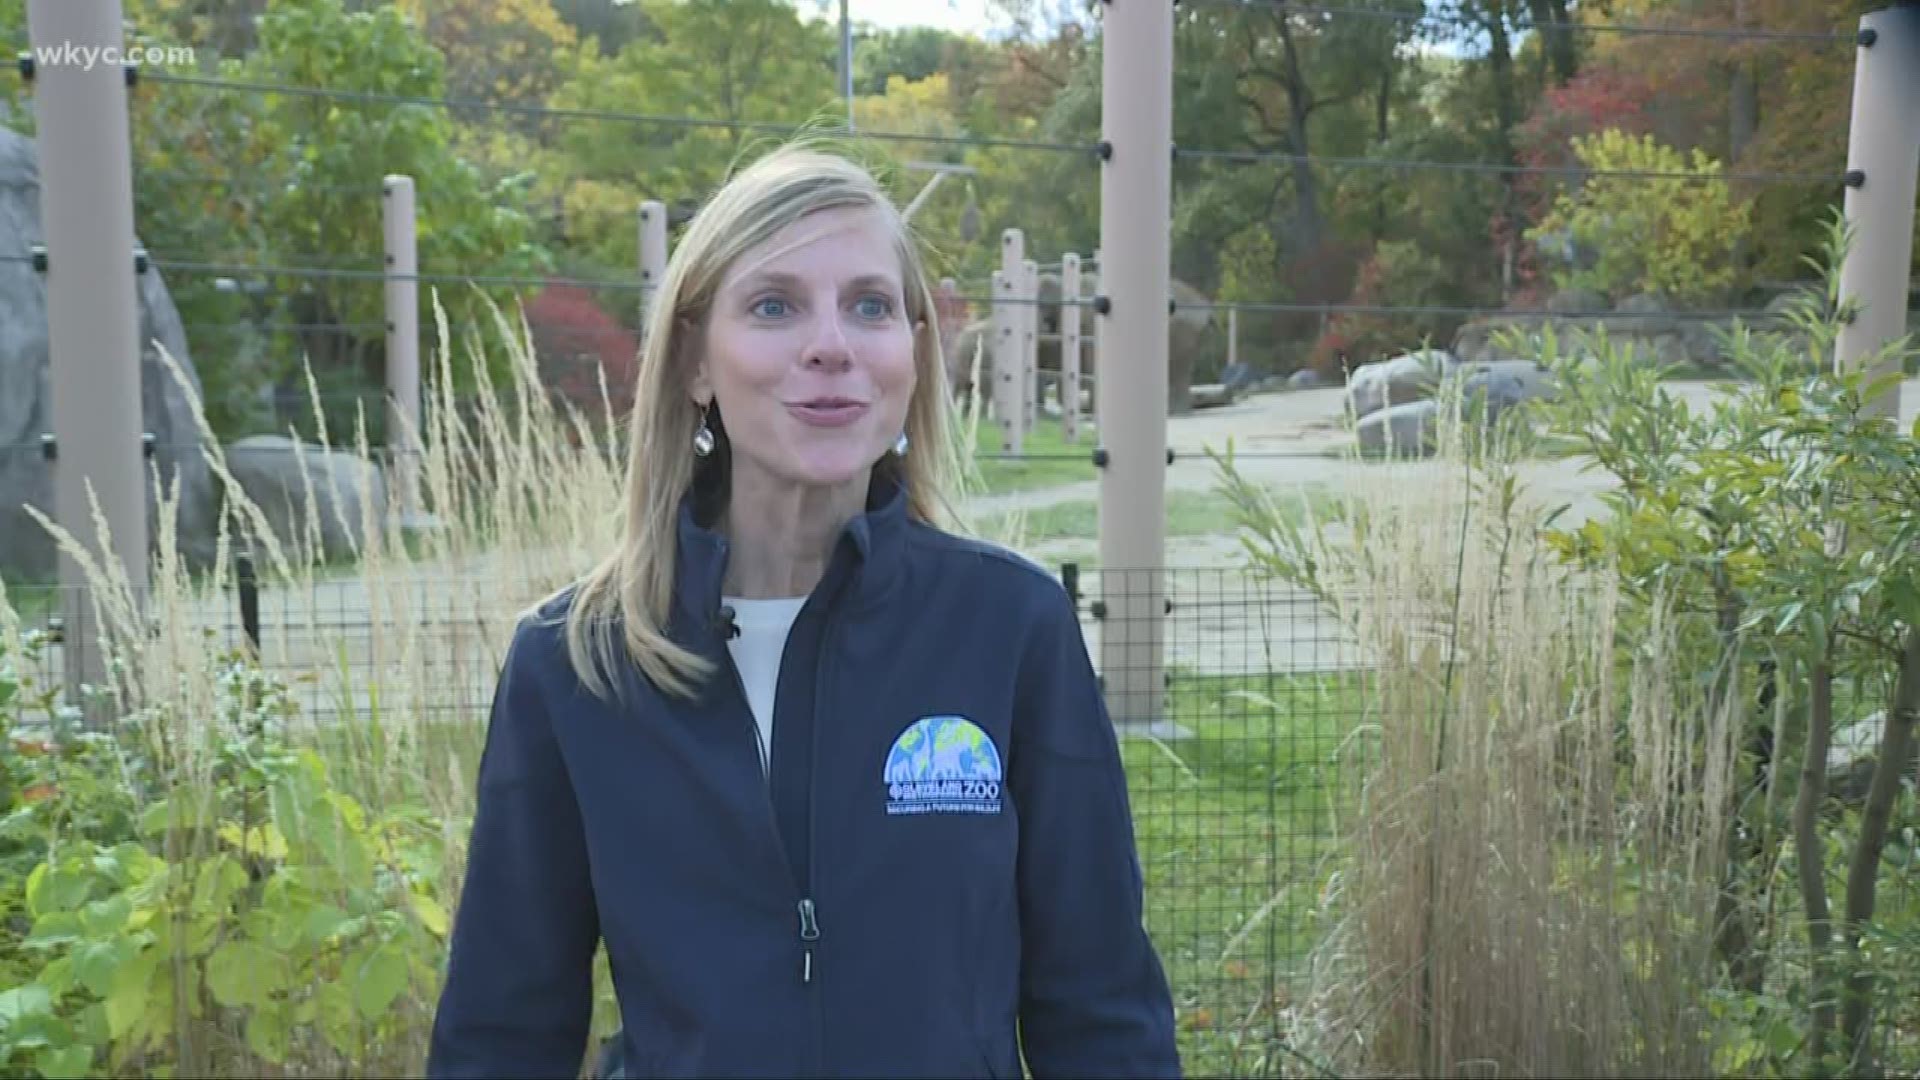 Wild winter lights coming to Cleveland zoo